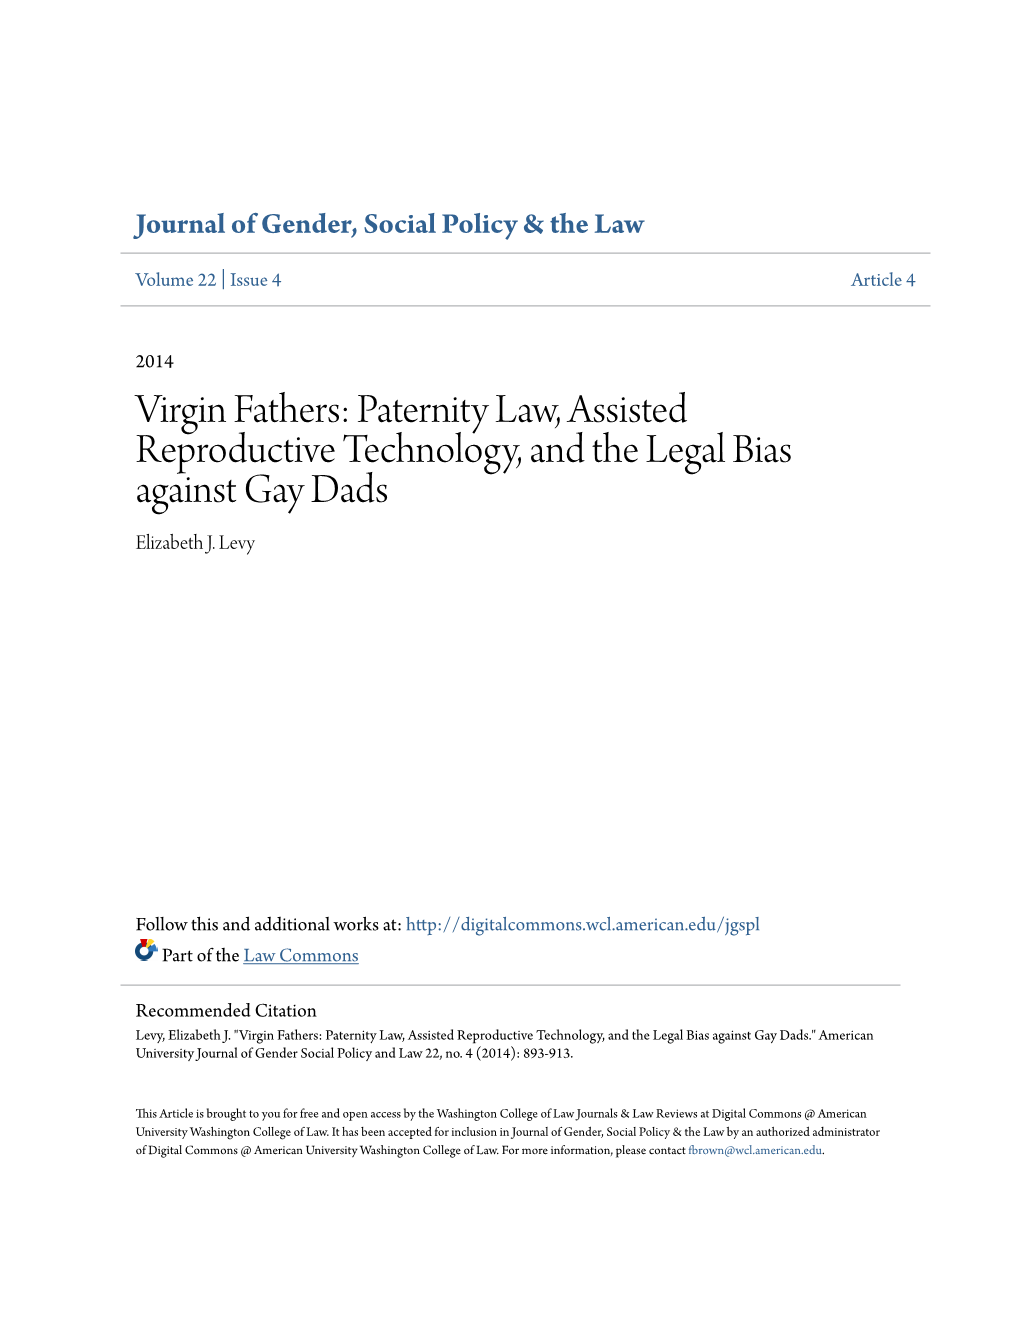 Virgin Fathers: Paternity Law, Assisted Reproductive Technology, and the Legal Bias Against Gay Dads Elizabeth J